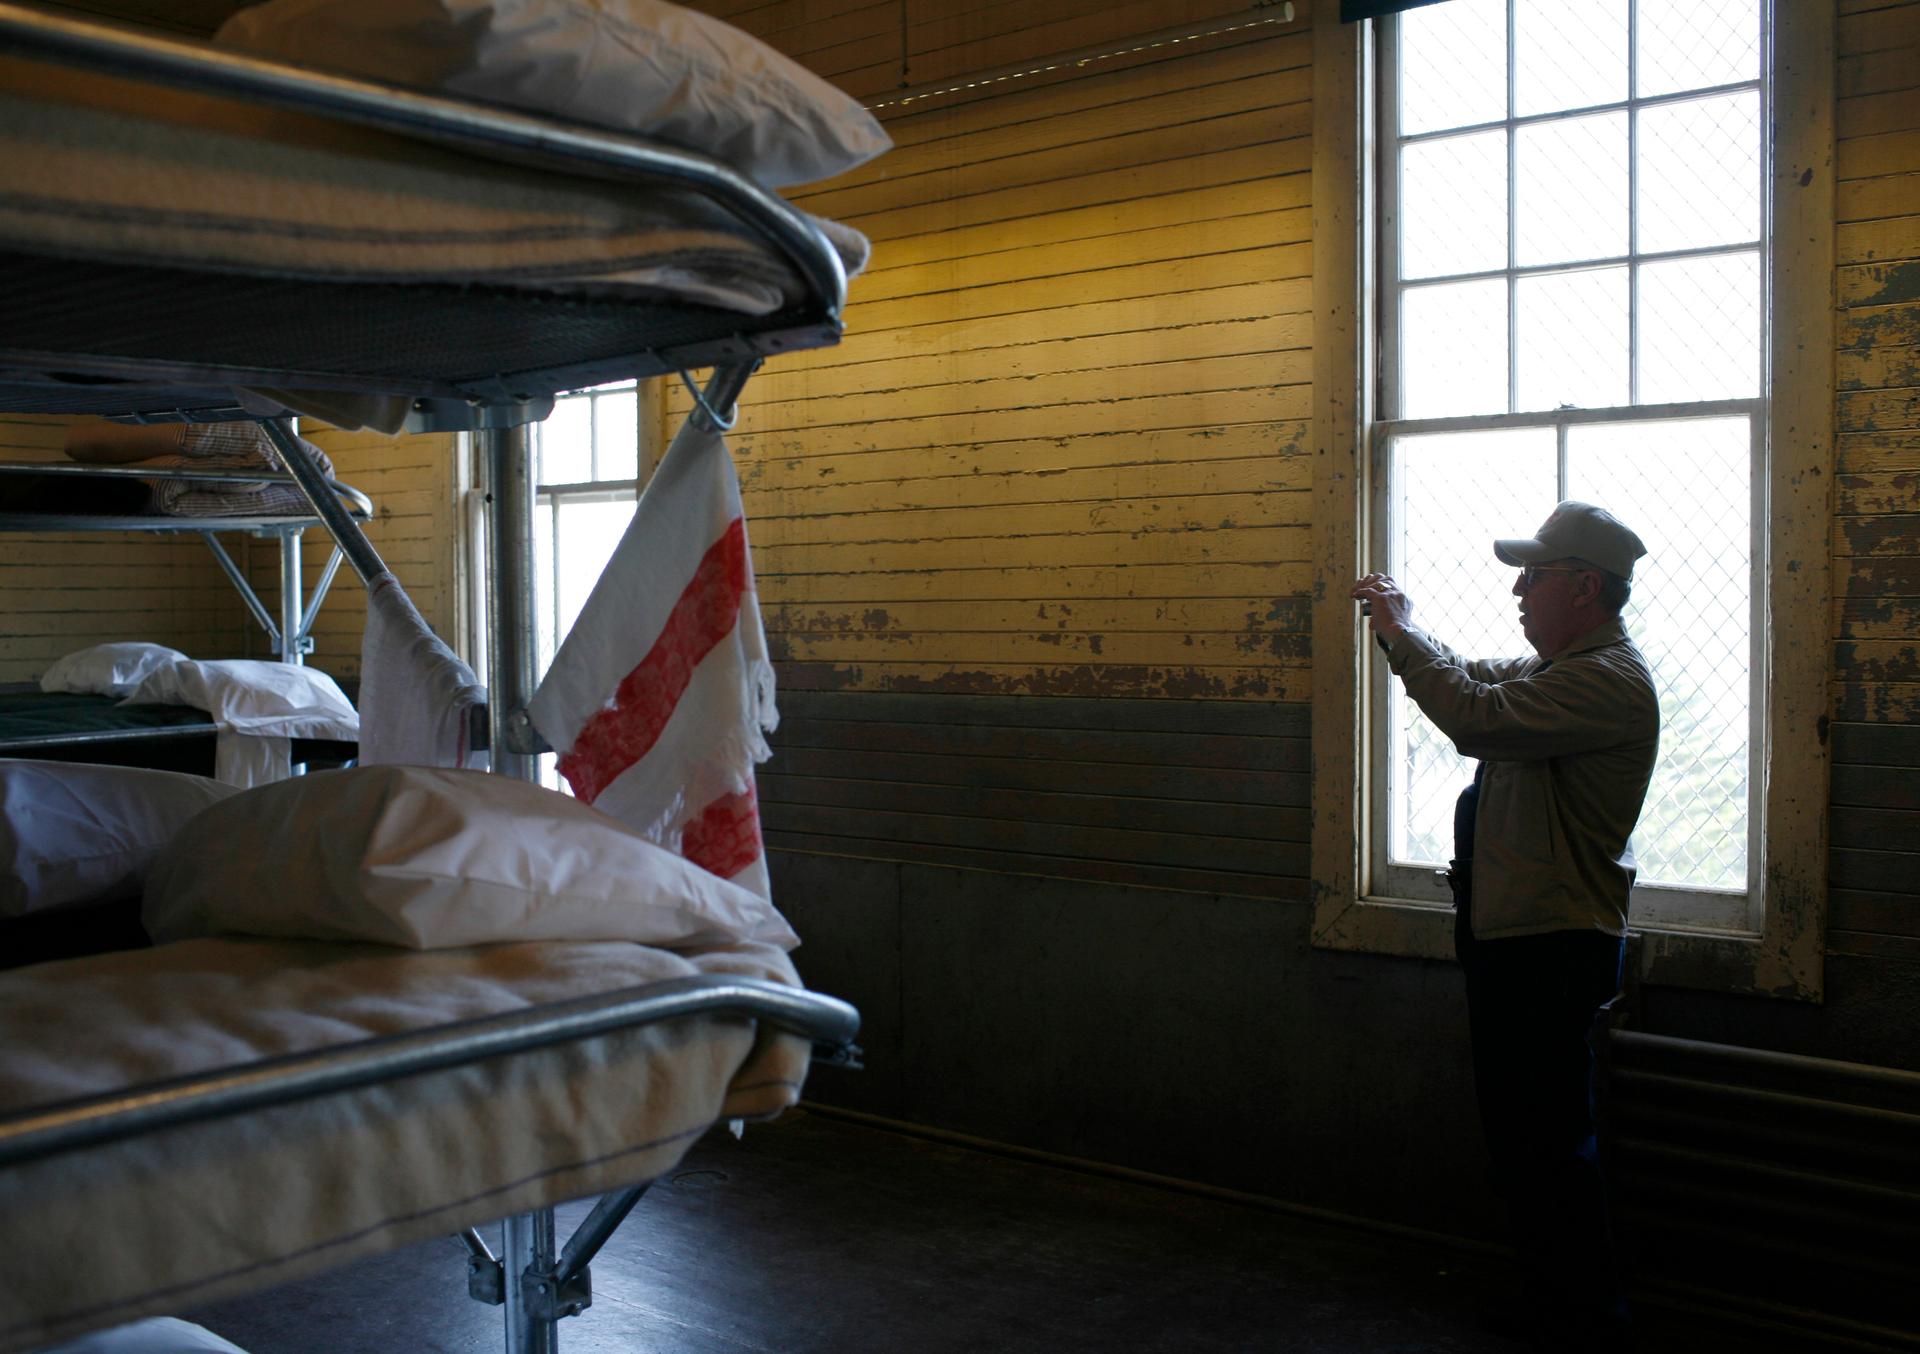 Bunk beds in cell, with man taking photo will cell phone